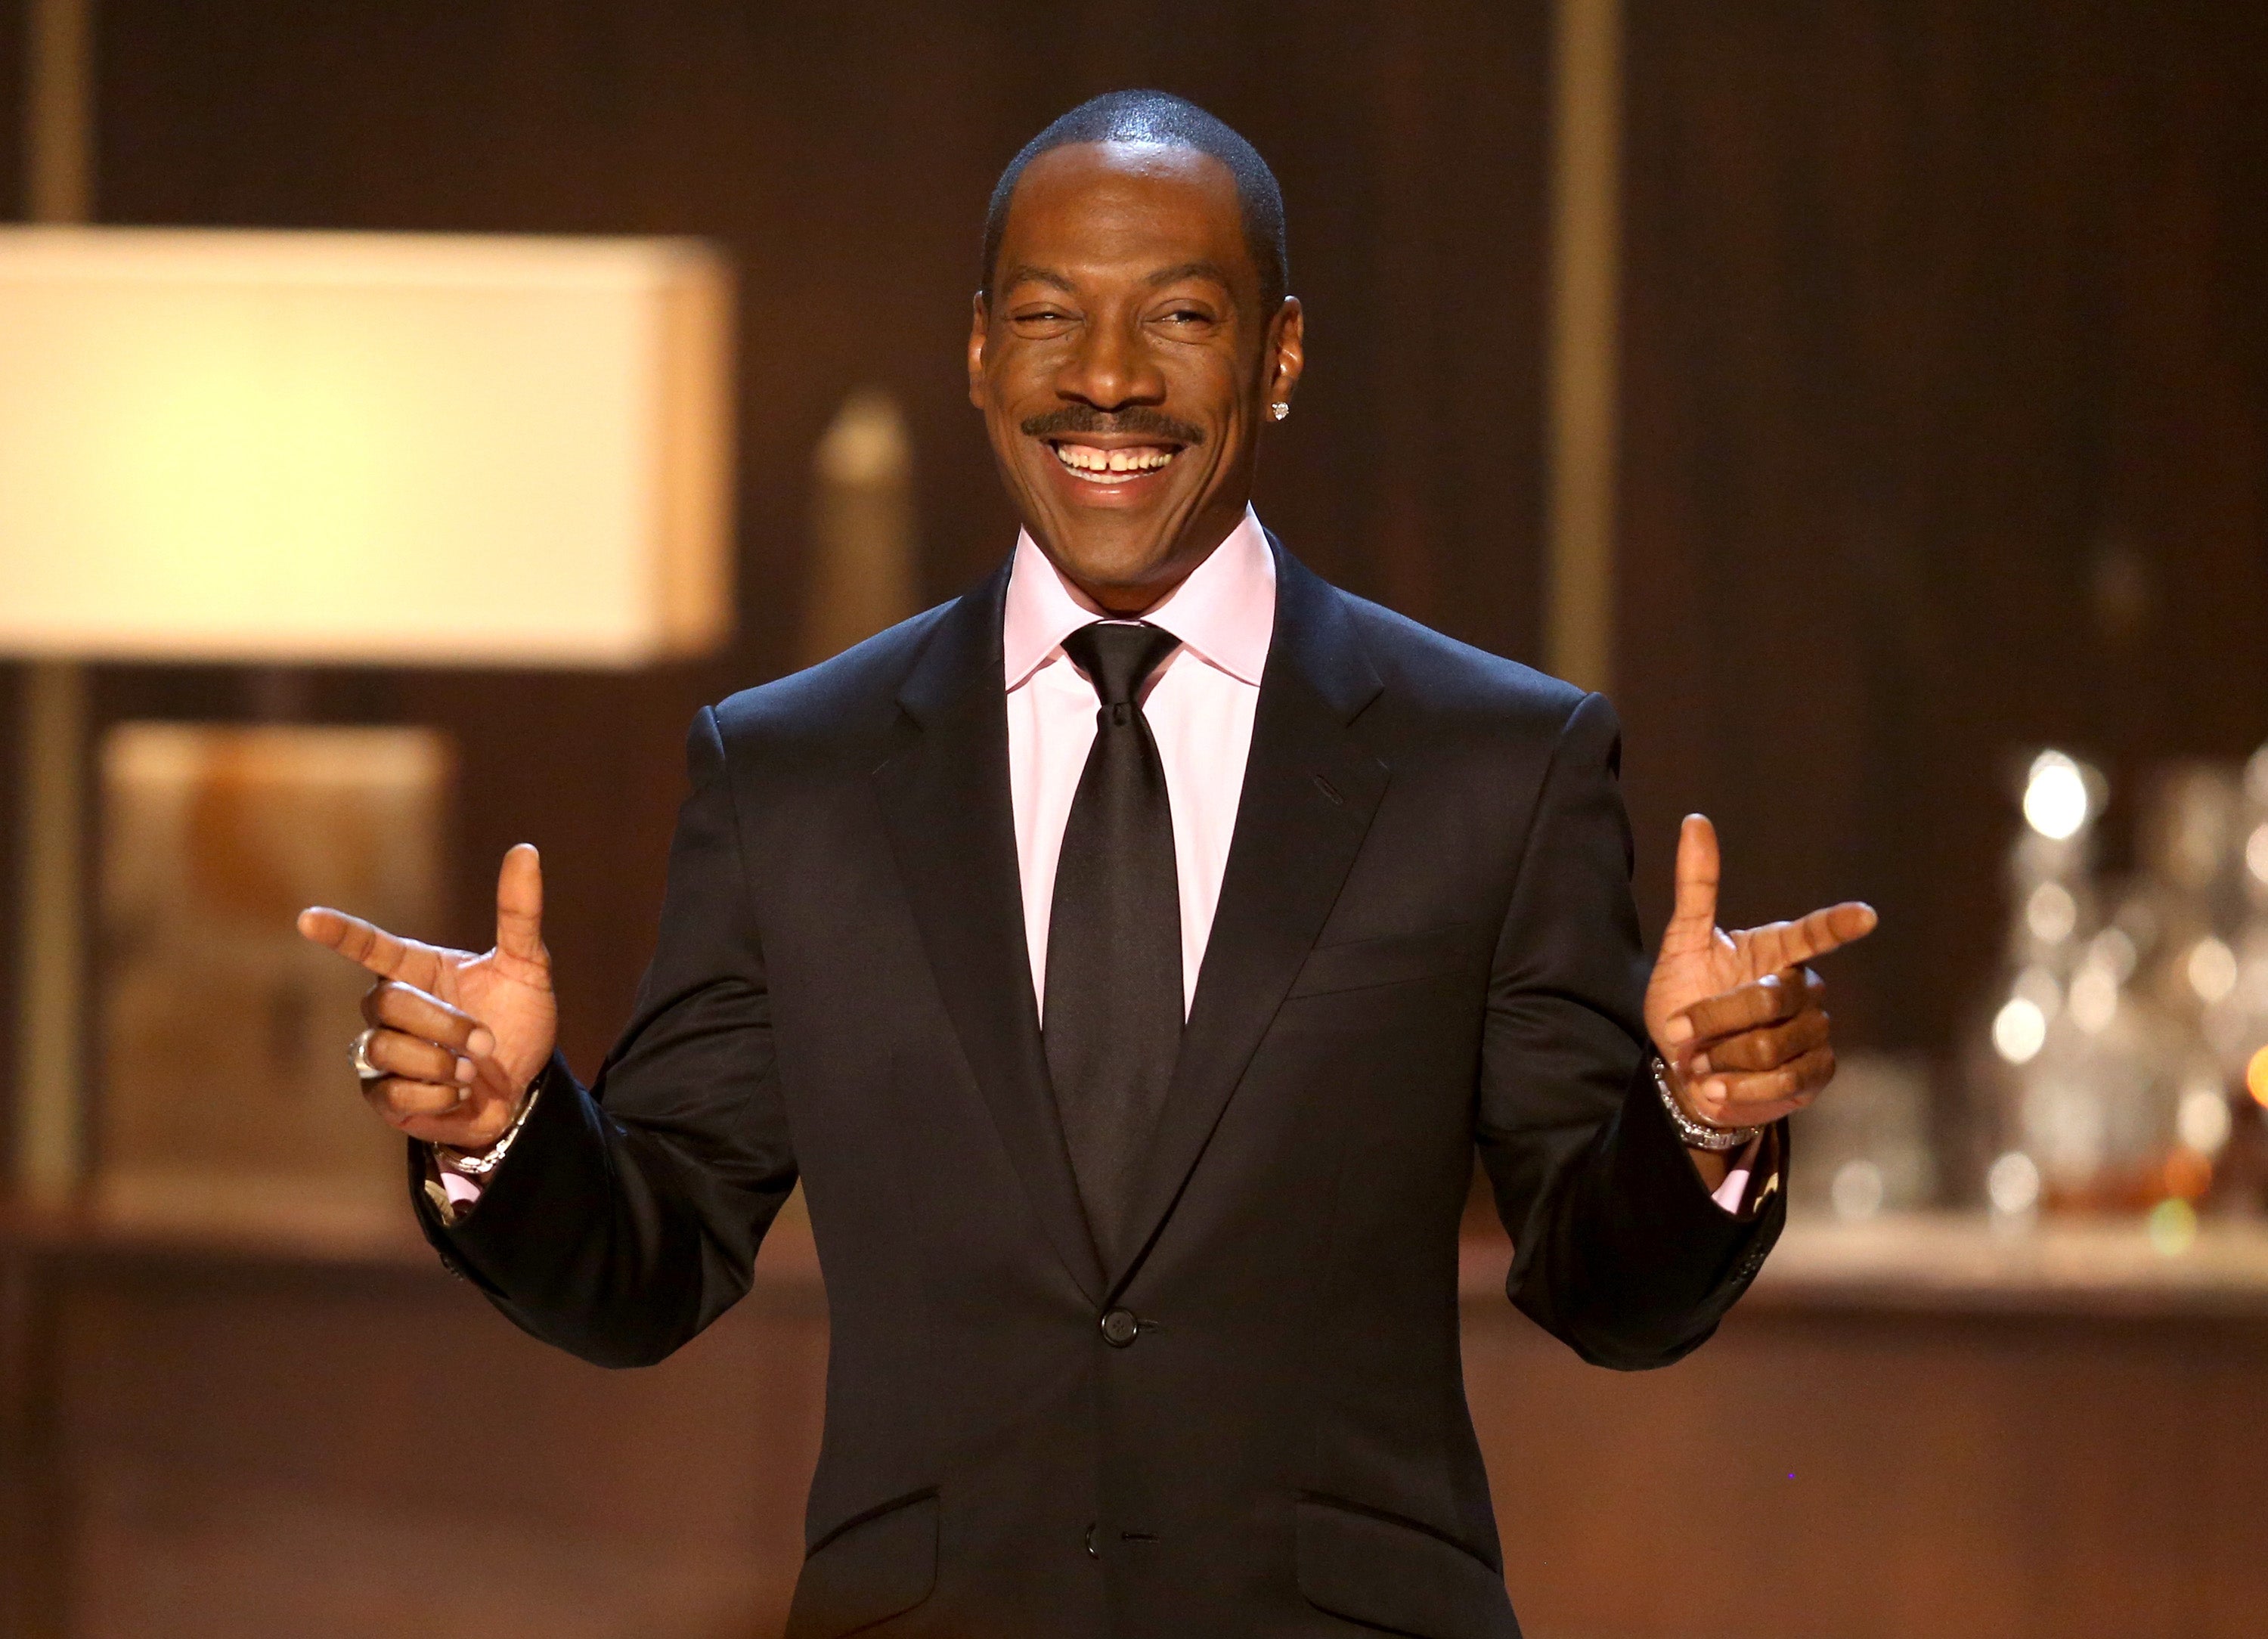 Eddie Murphy refused to impersonate Bill Cosby